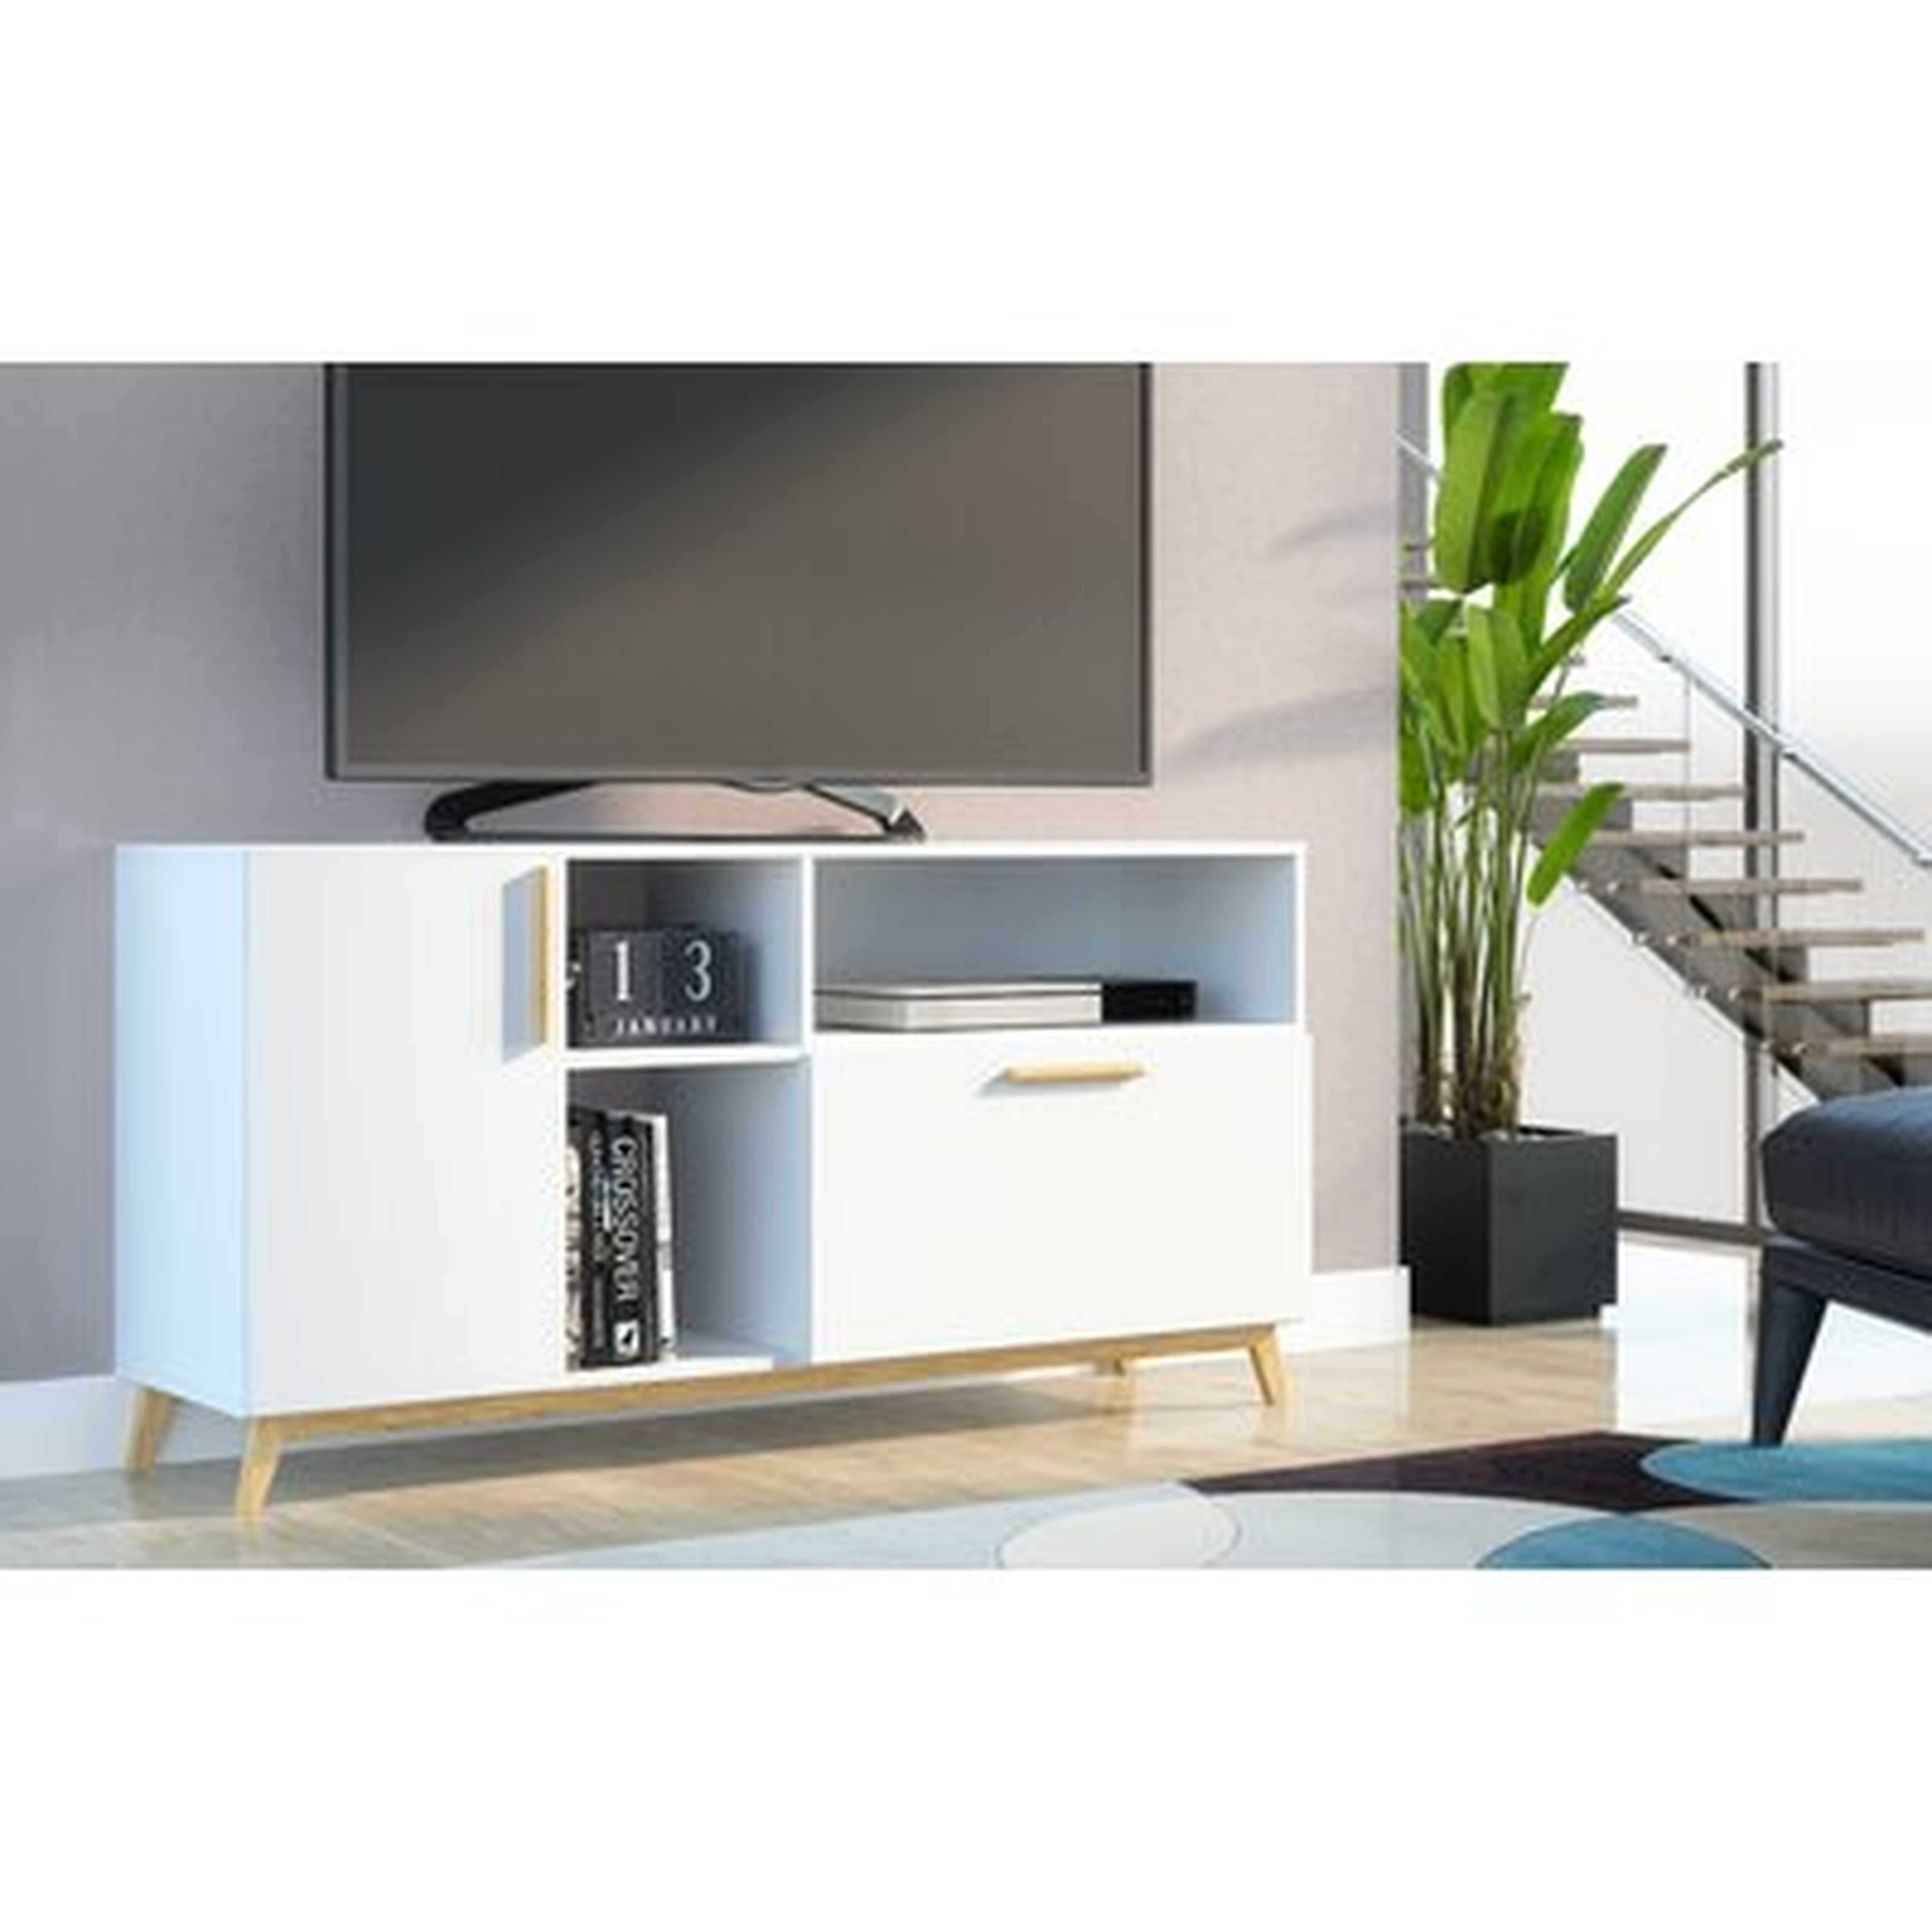 Scaggs TV Stand for TVs up to 60 inches - Wayfair